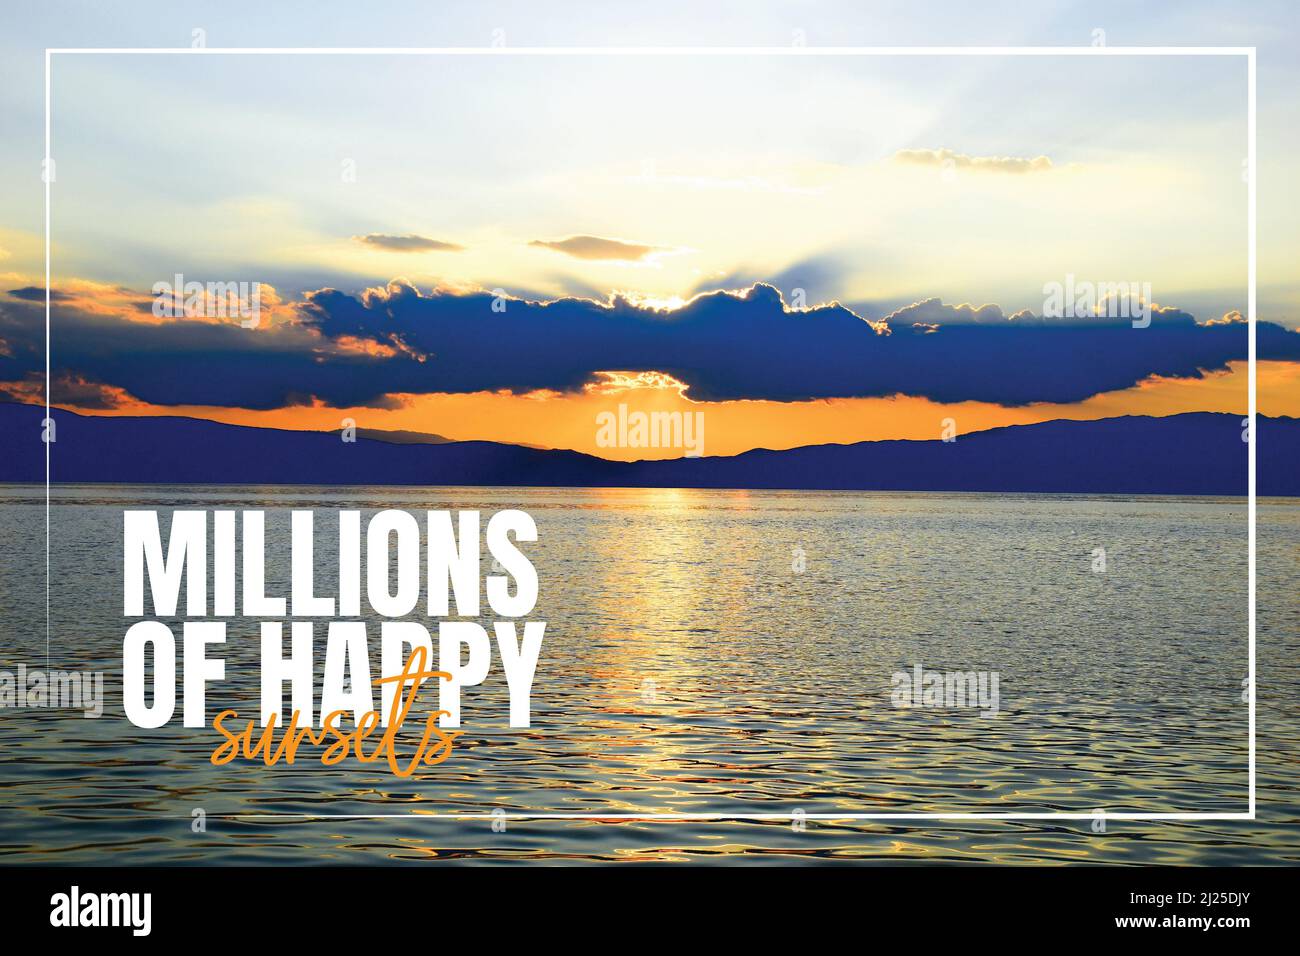 Millions of happy sunsets. Beautiful positive quote. Sunset photography Stock Photo